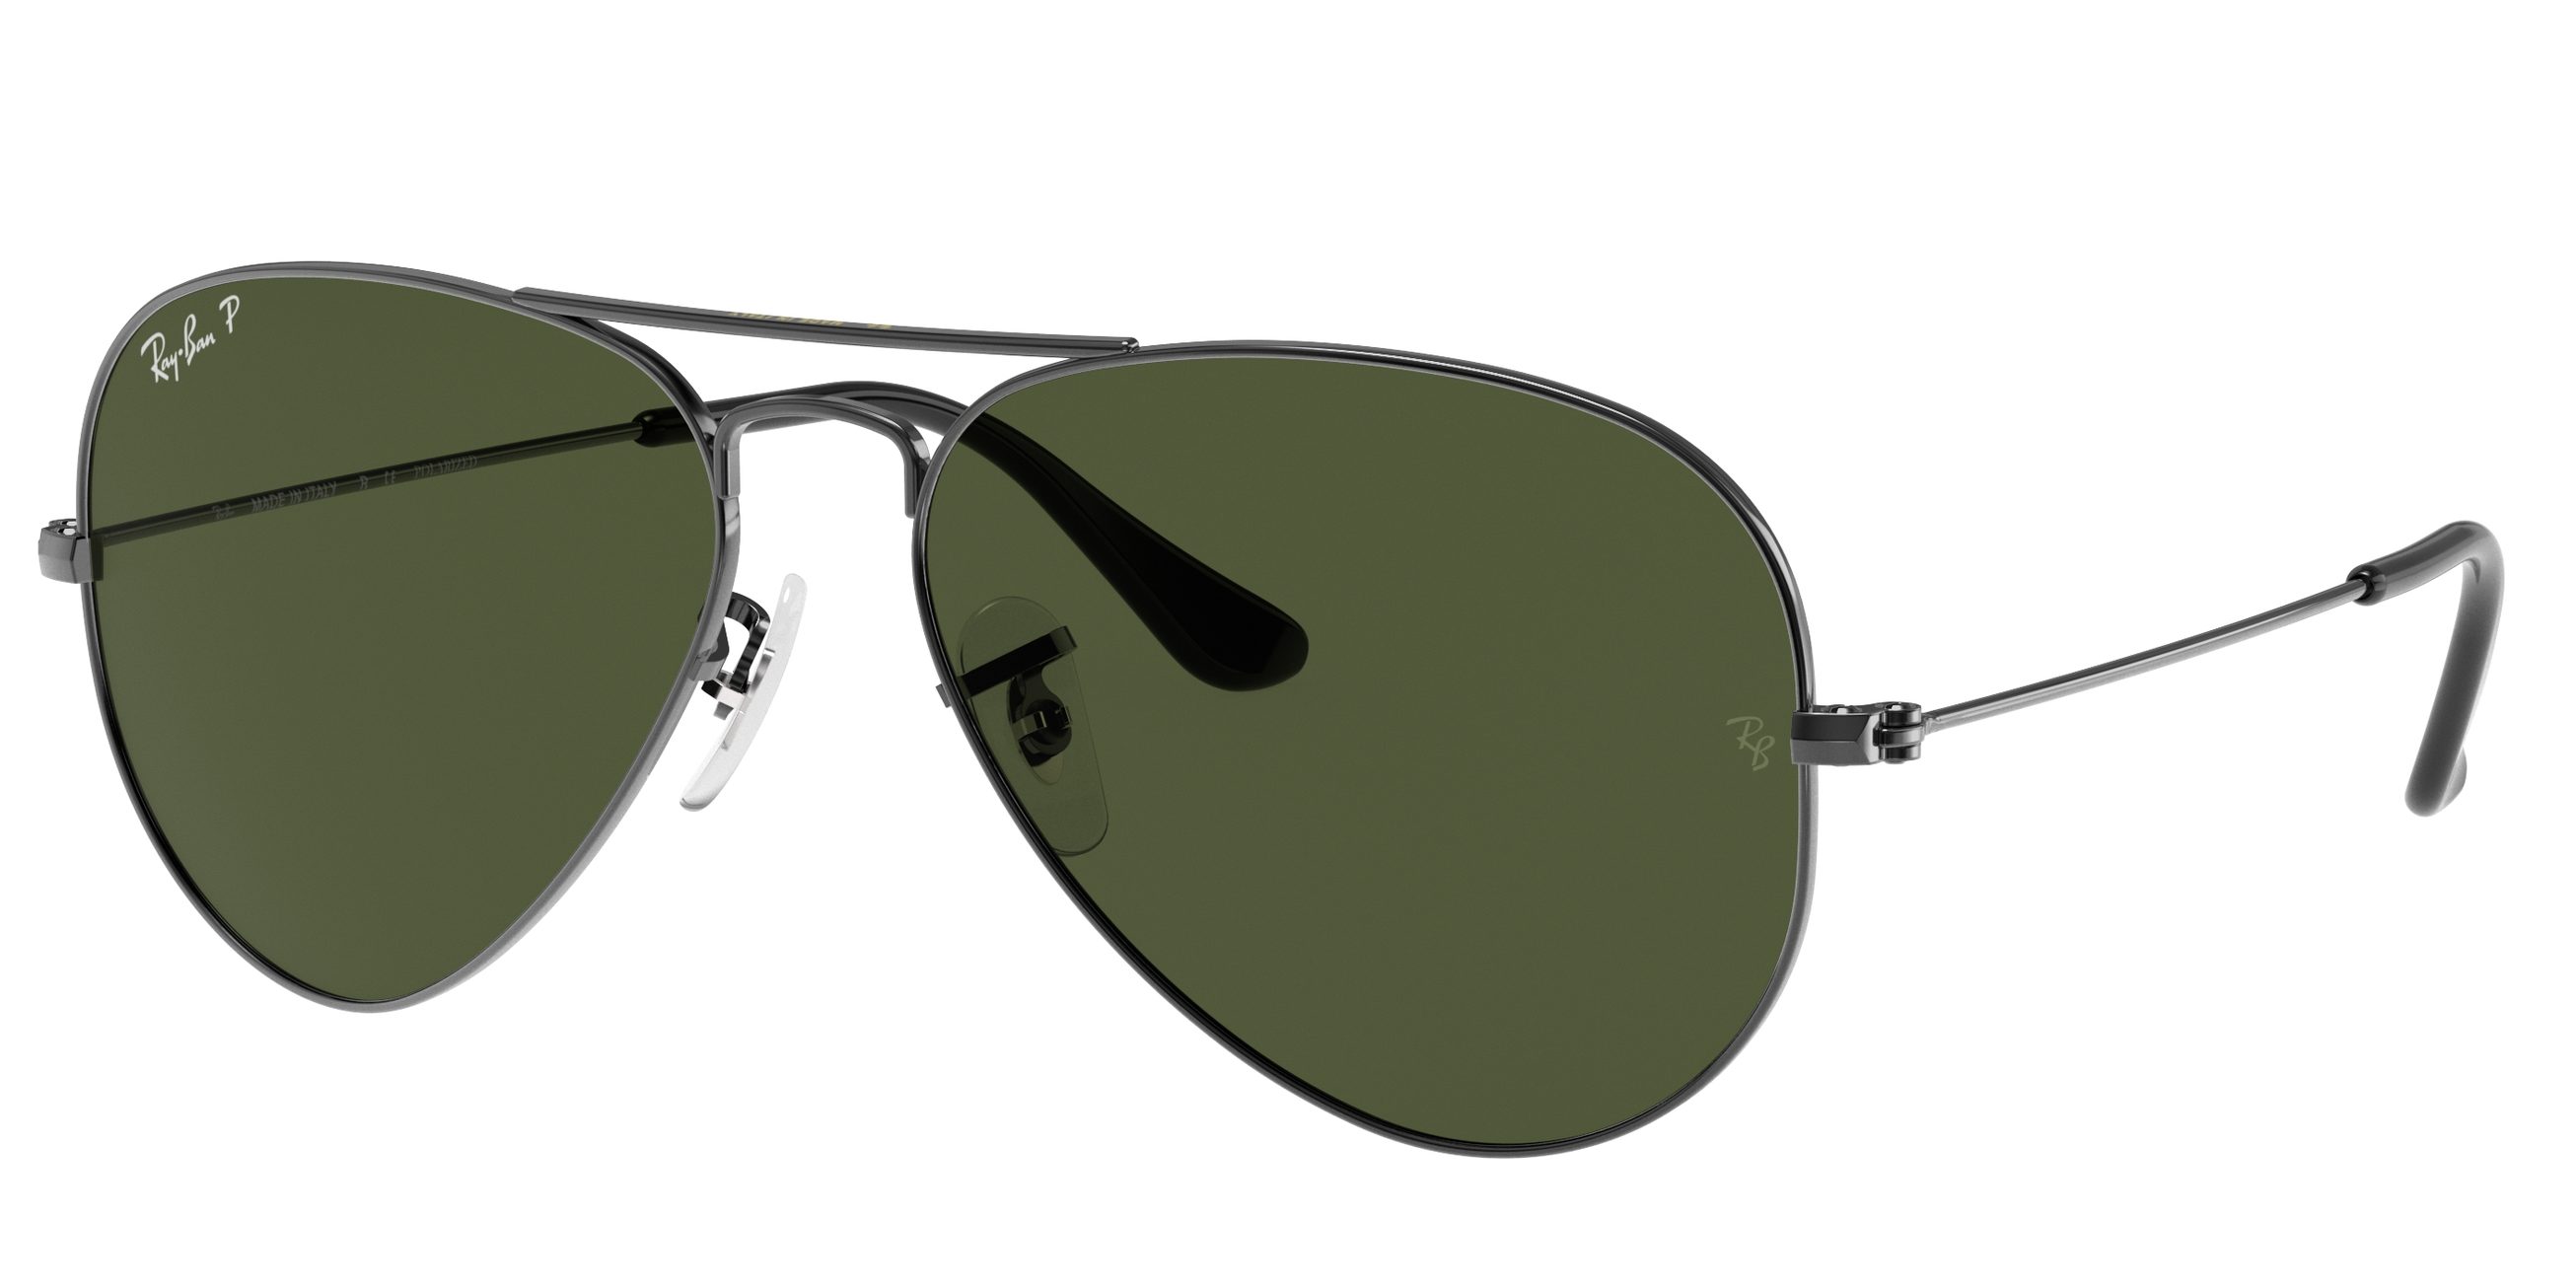 Ray-Ban Aviator sunglasses review for driving